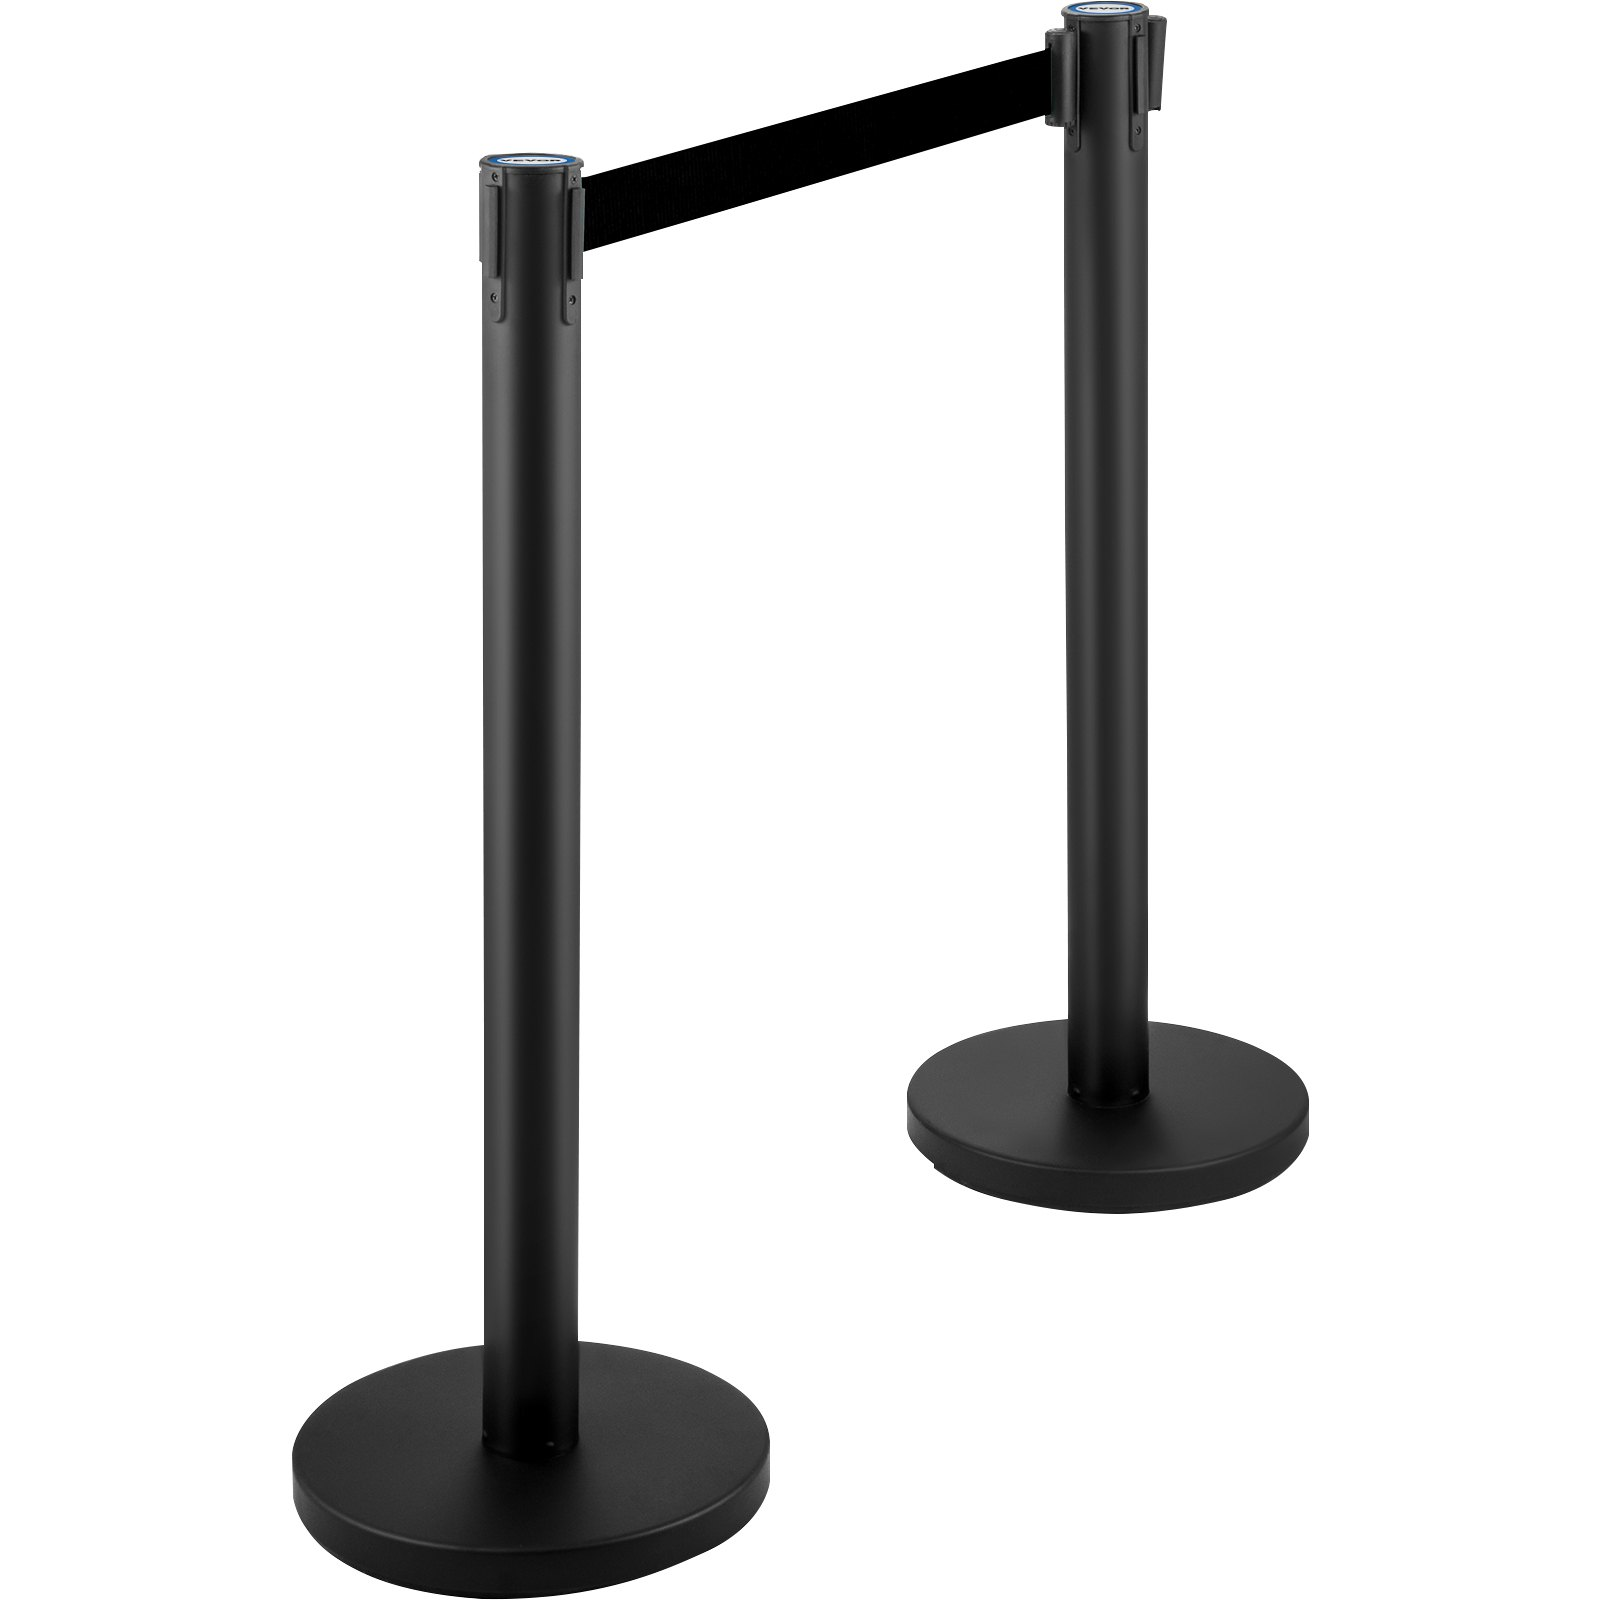 VEVOR Crowd Control Stanchion, Set of 4 Pieces Stanchion Set, Stanchion Set with 6.6 ft/2 m Black Retractable Belt, Black Crowd Control Barrier w/Concrete and Metal Base – Easy Connect Assembly, Goodies N Stuff